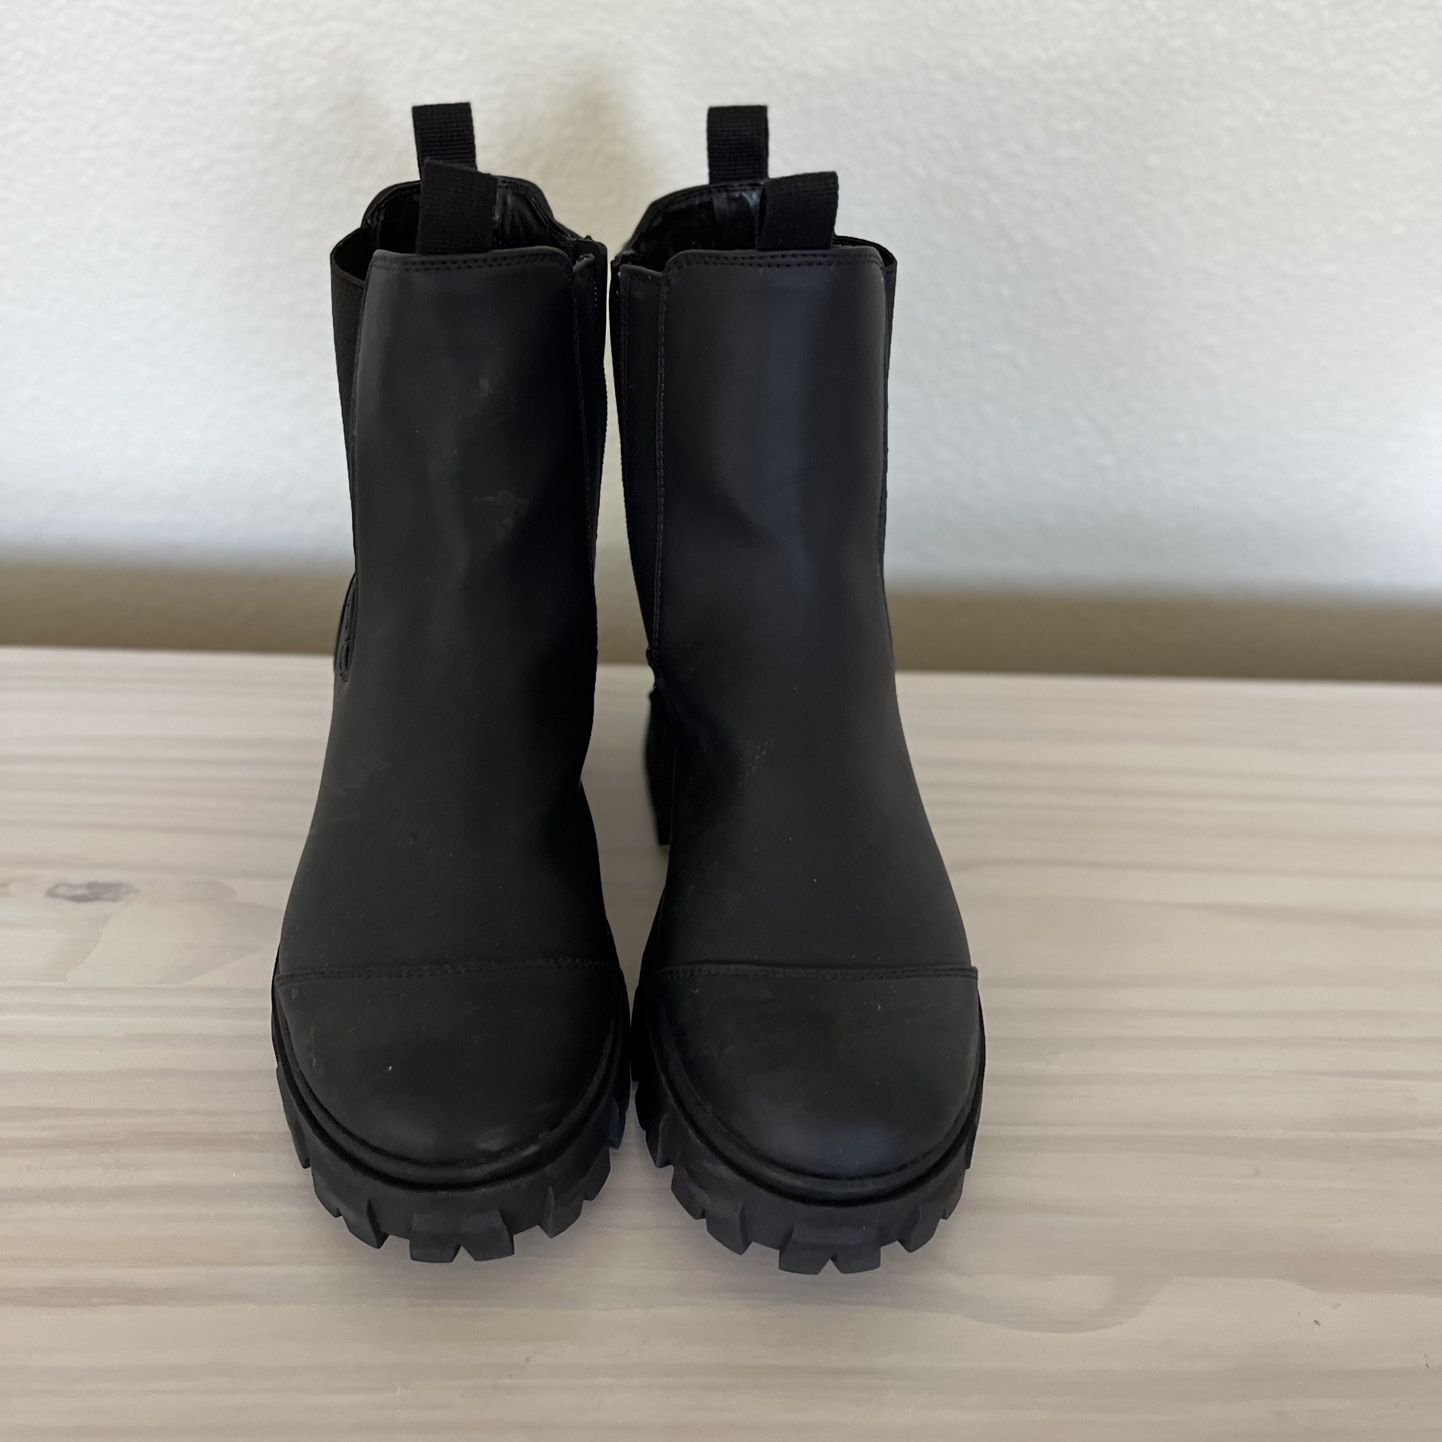 Rubber lug boots